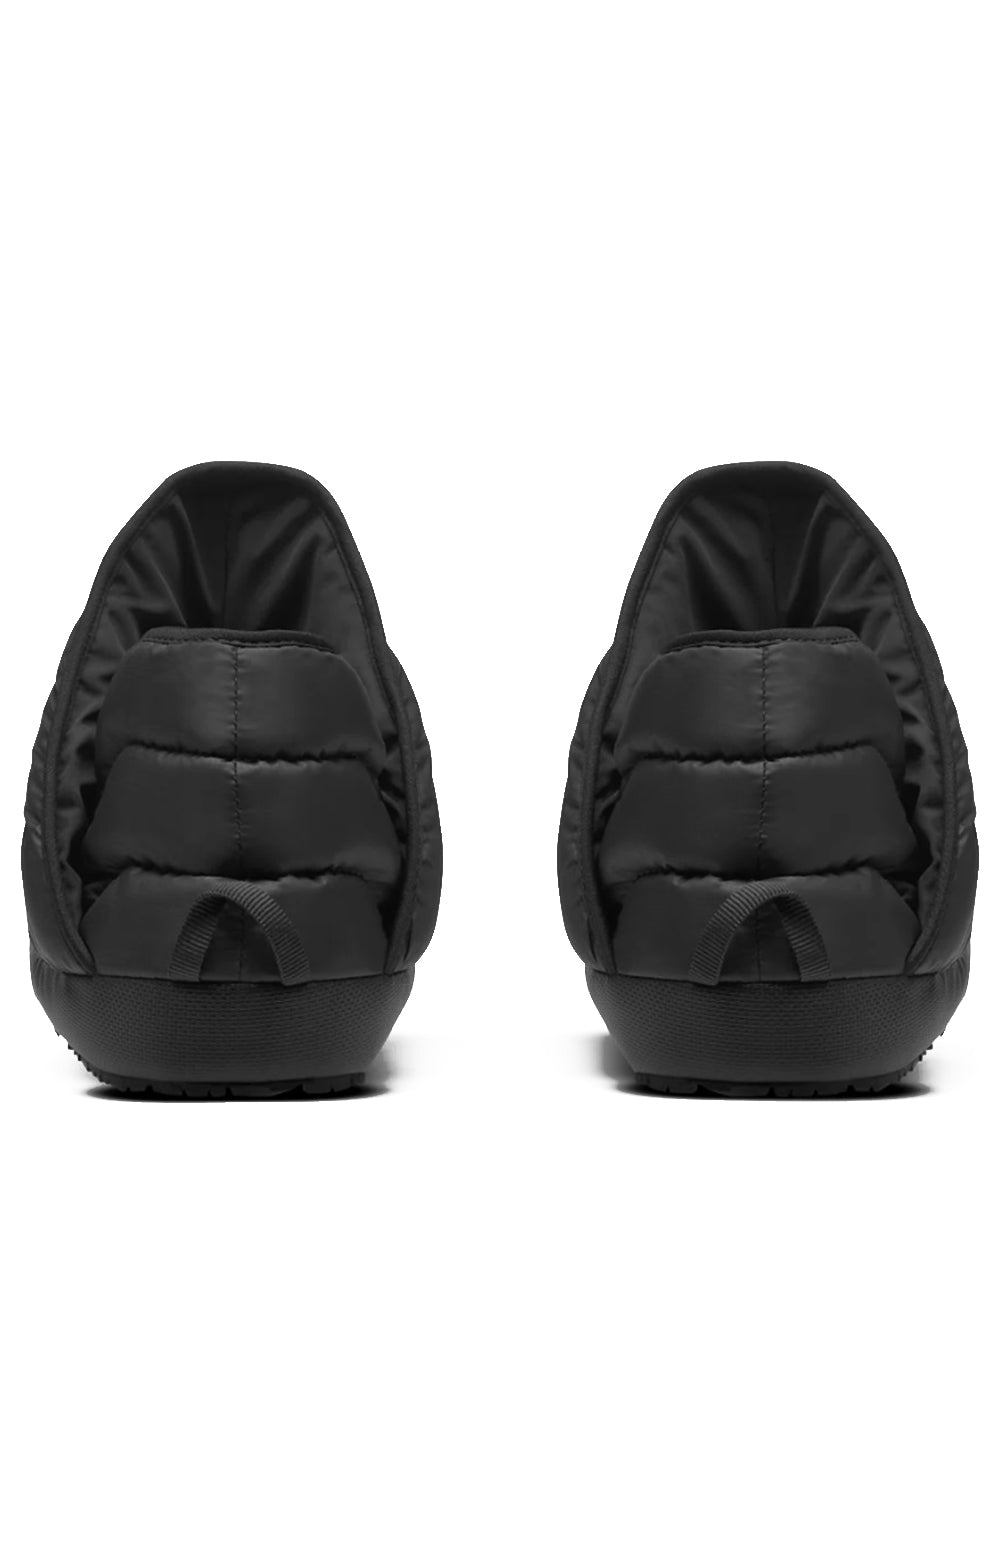 (MKHKY4) ThermoBall Traction Booties - TNF Black